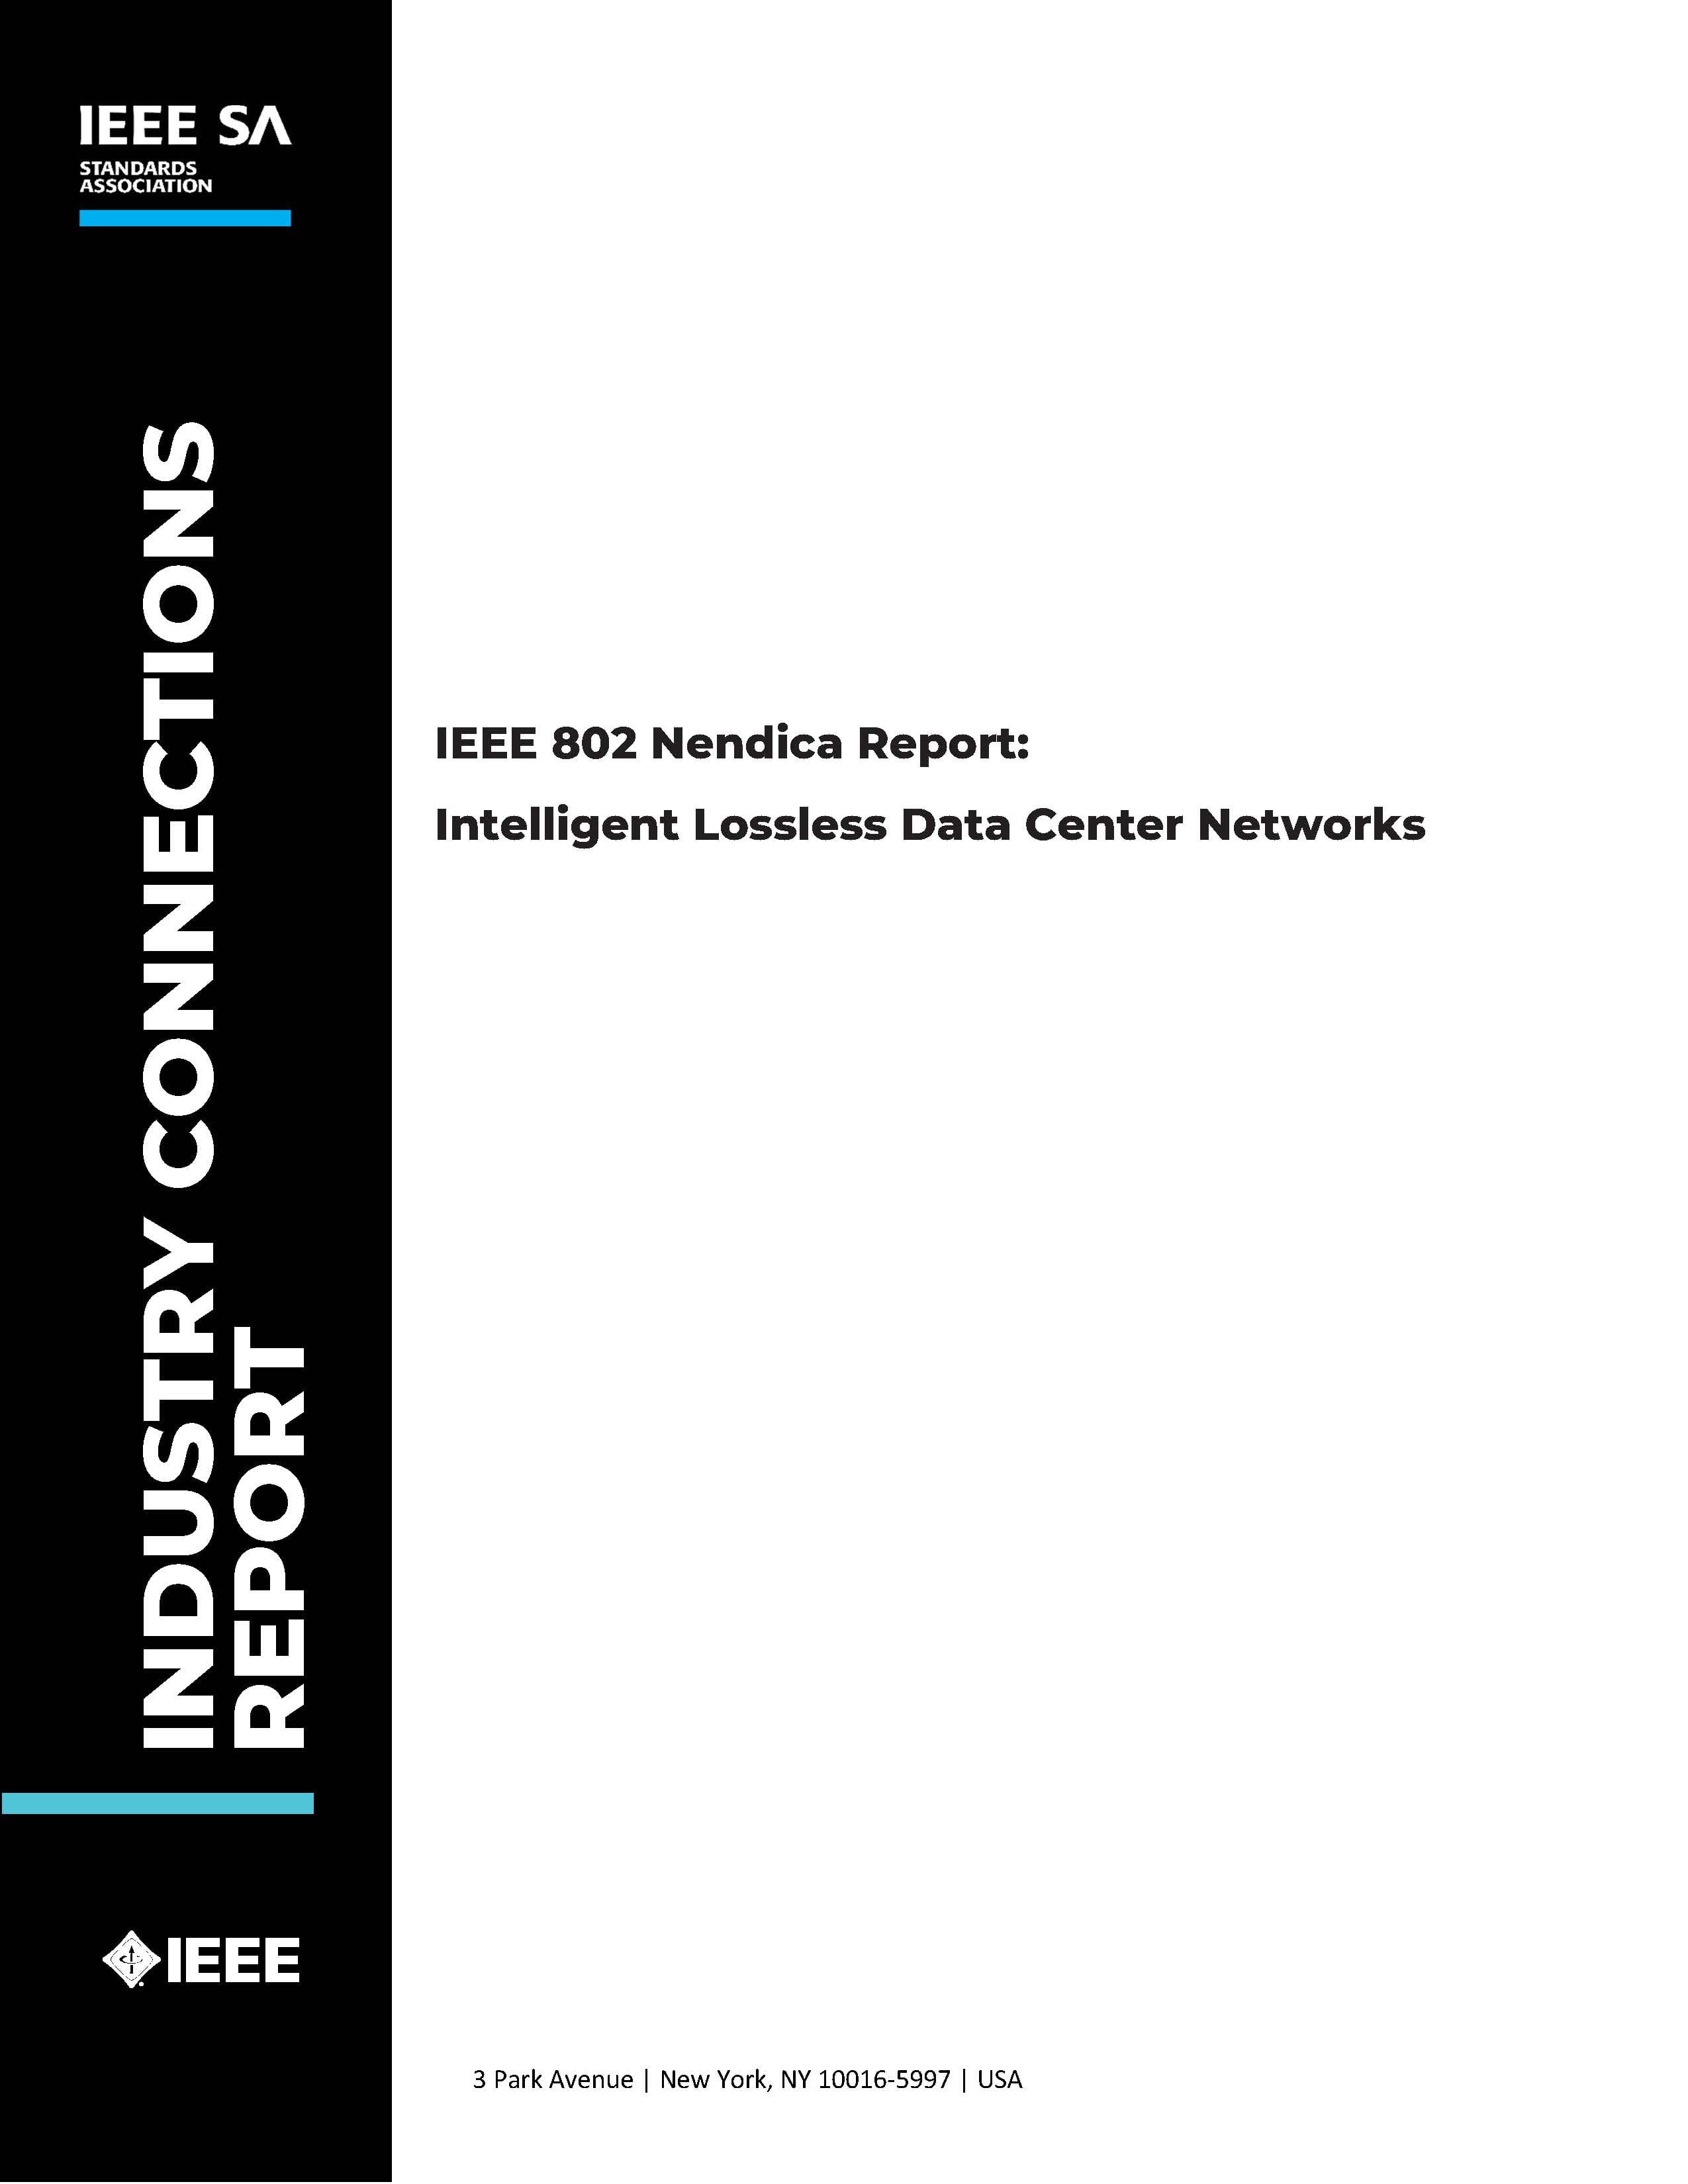 IEEE 802 Nendica Report: Intelligent Lossless Data Center Networks Cover